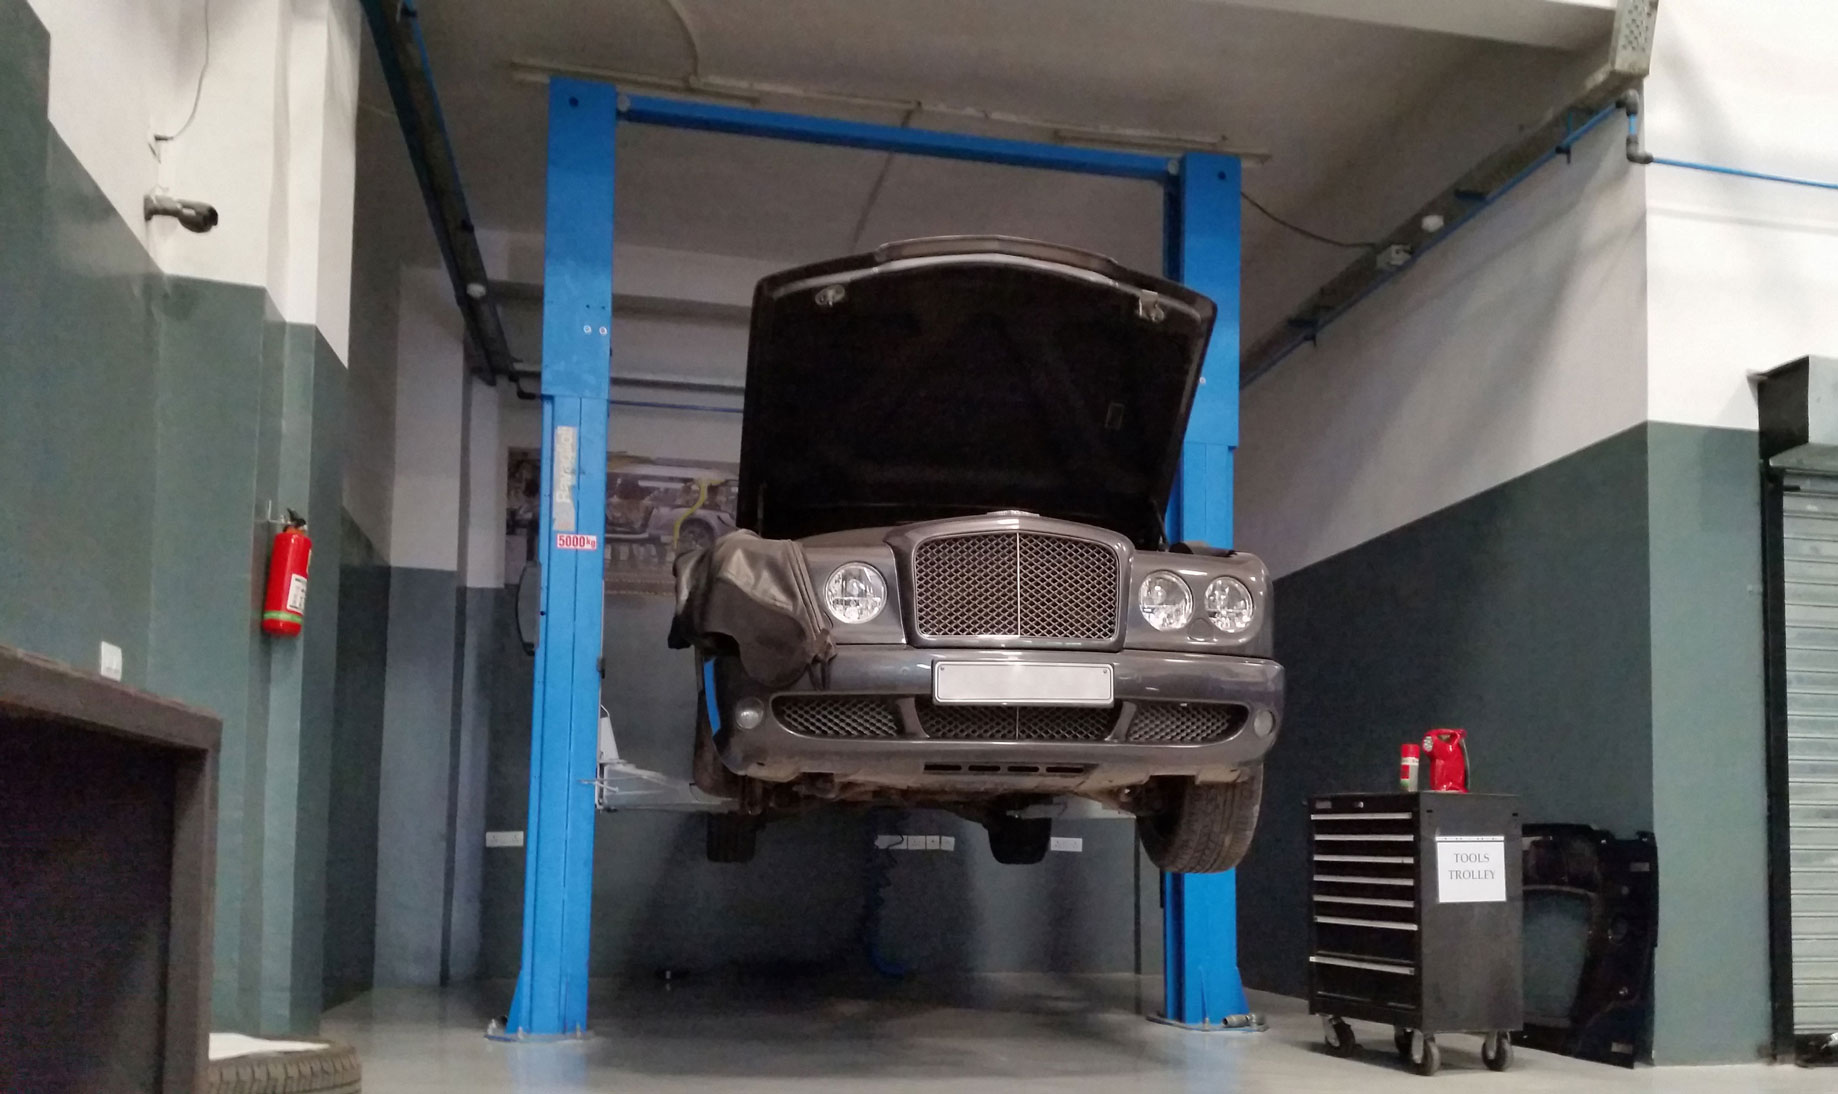 Car is lifted by a Ravaglioli 2-post lift with a load capacity of 5000 kg